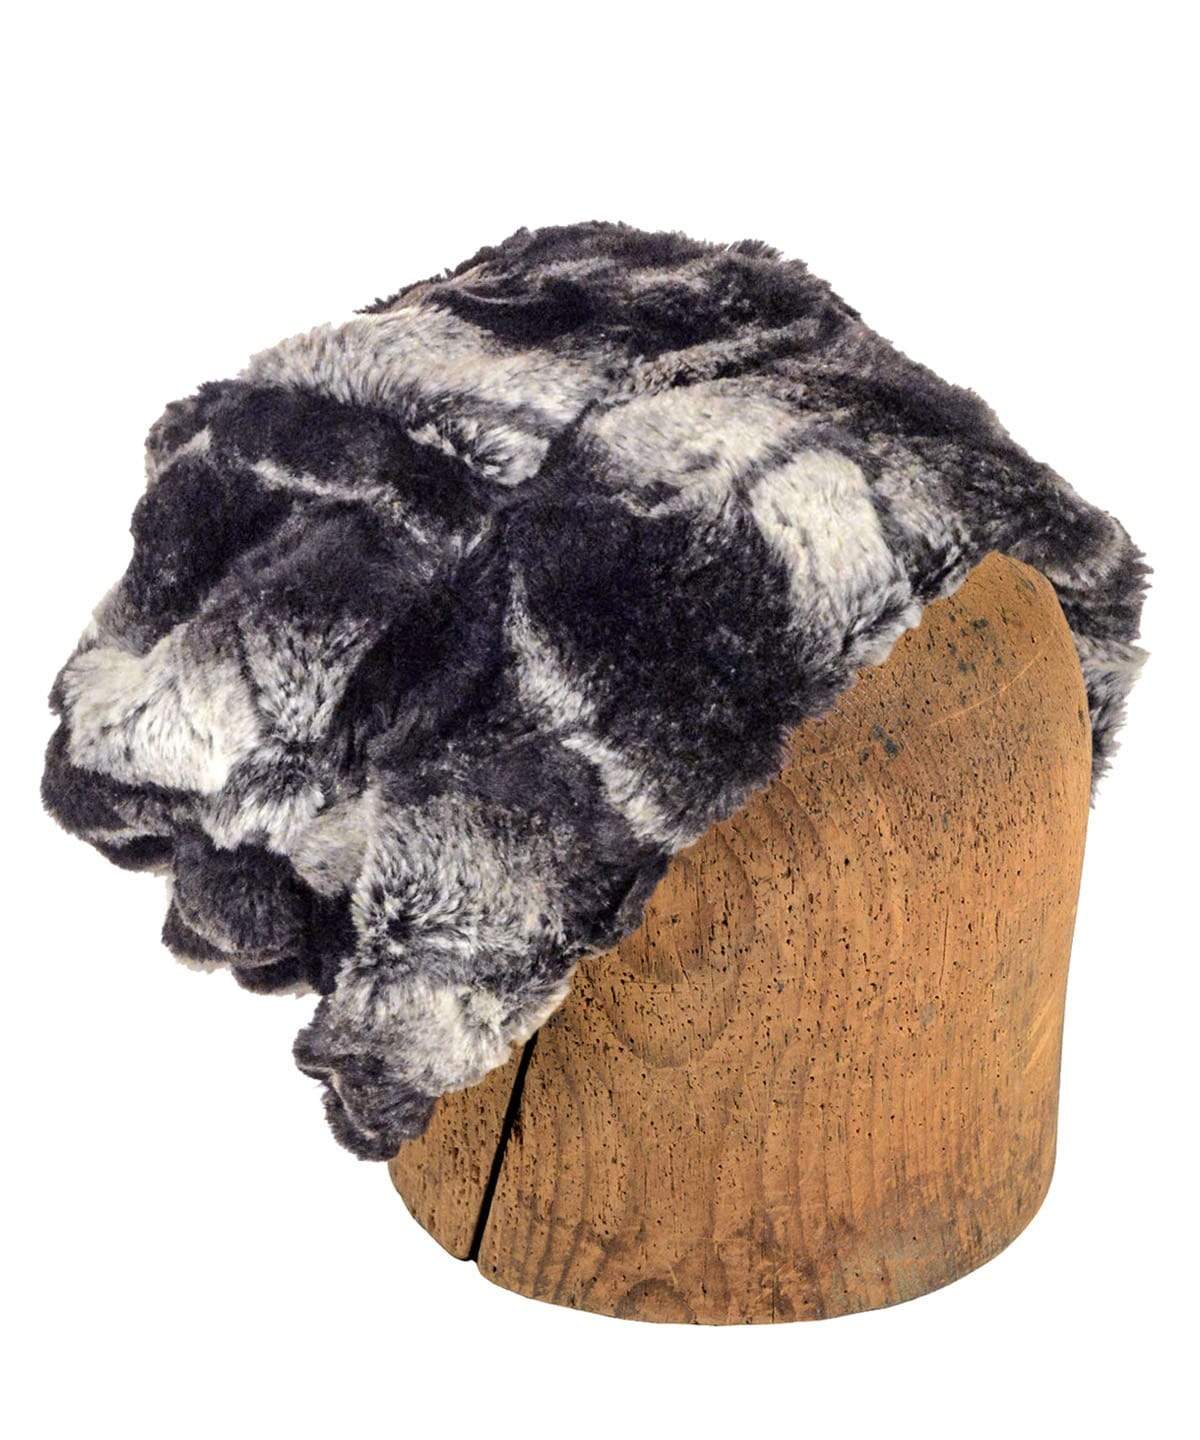 Men&#39;s Beanie Hat Shown in a Slouchy Style, Reversible | Honey Badger, Black and Cream Faux Fur | Handmade in the USA by Pandemonium Seattle